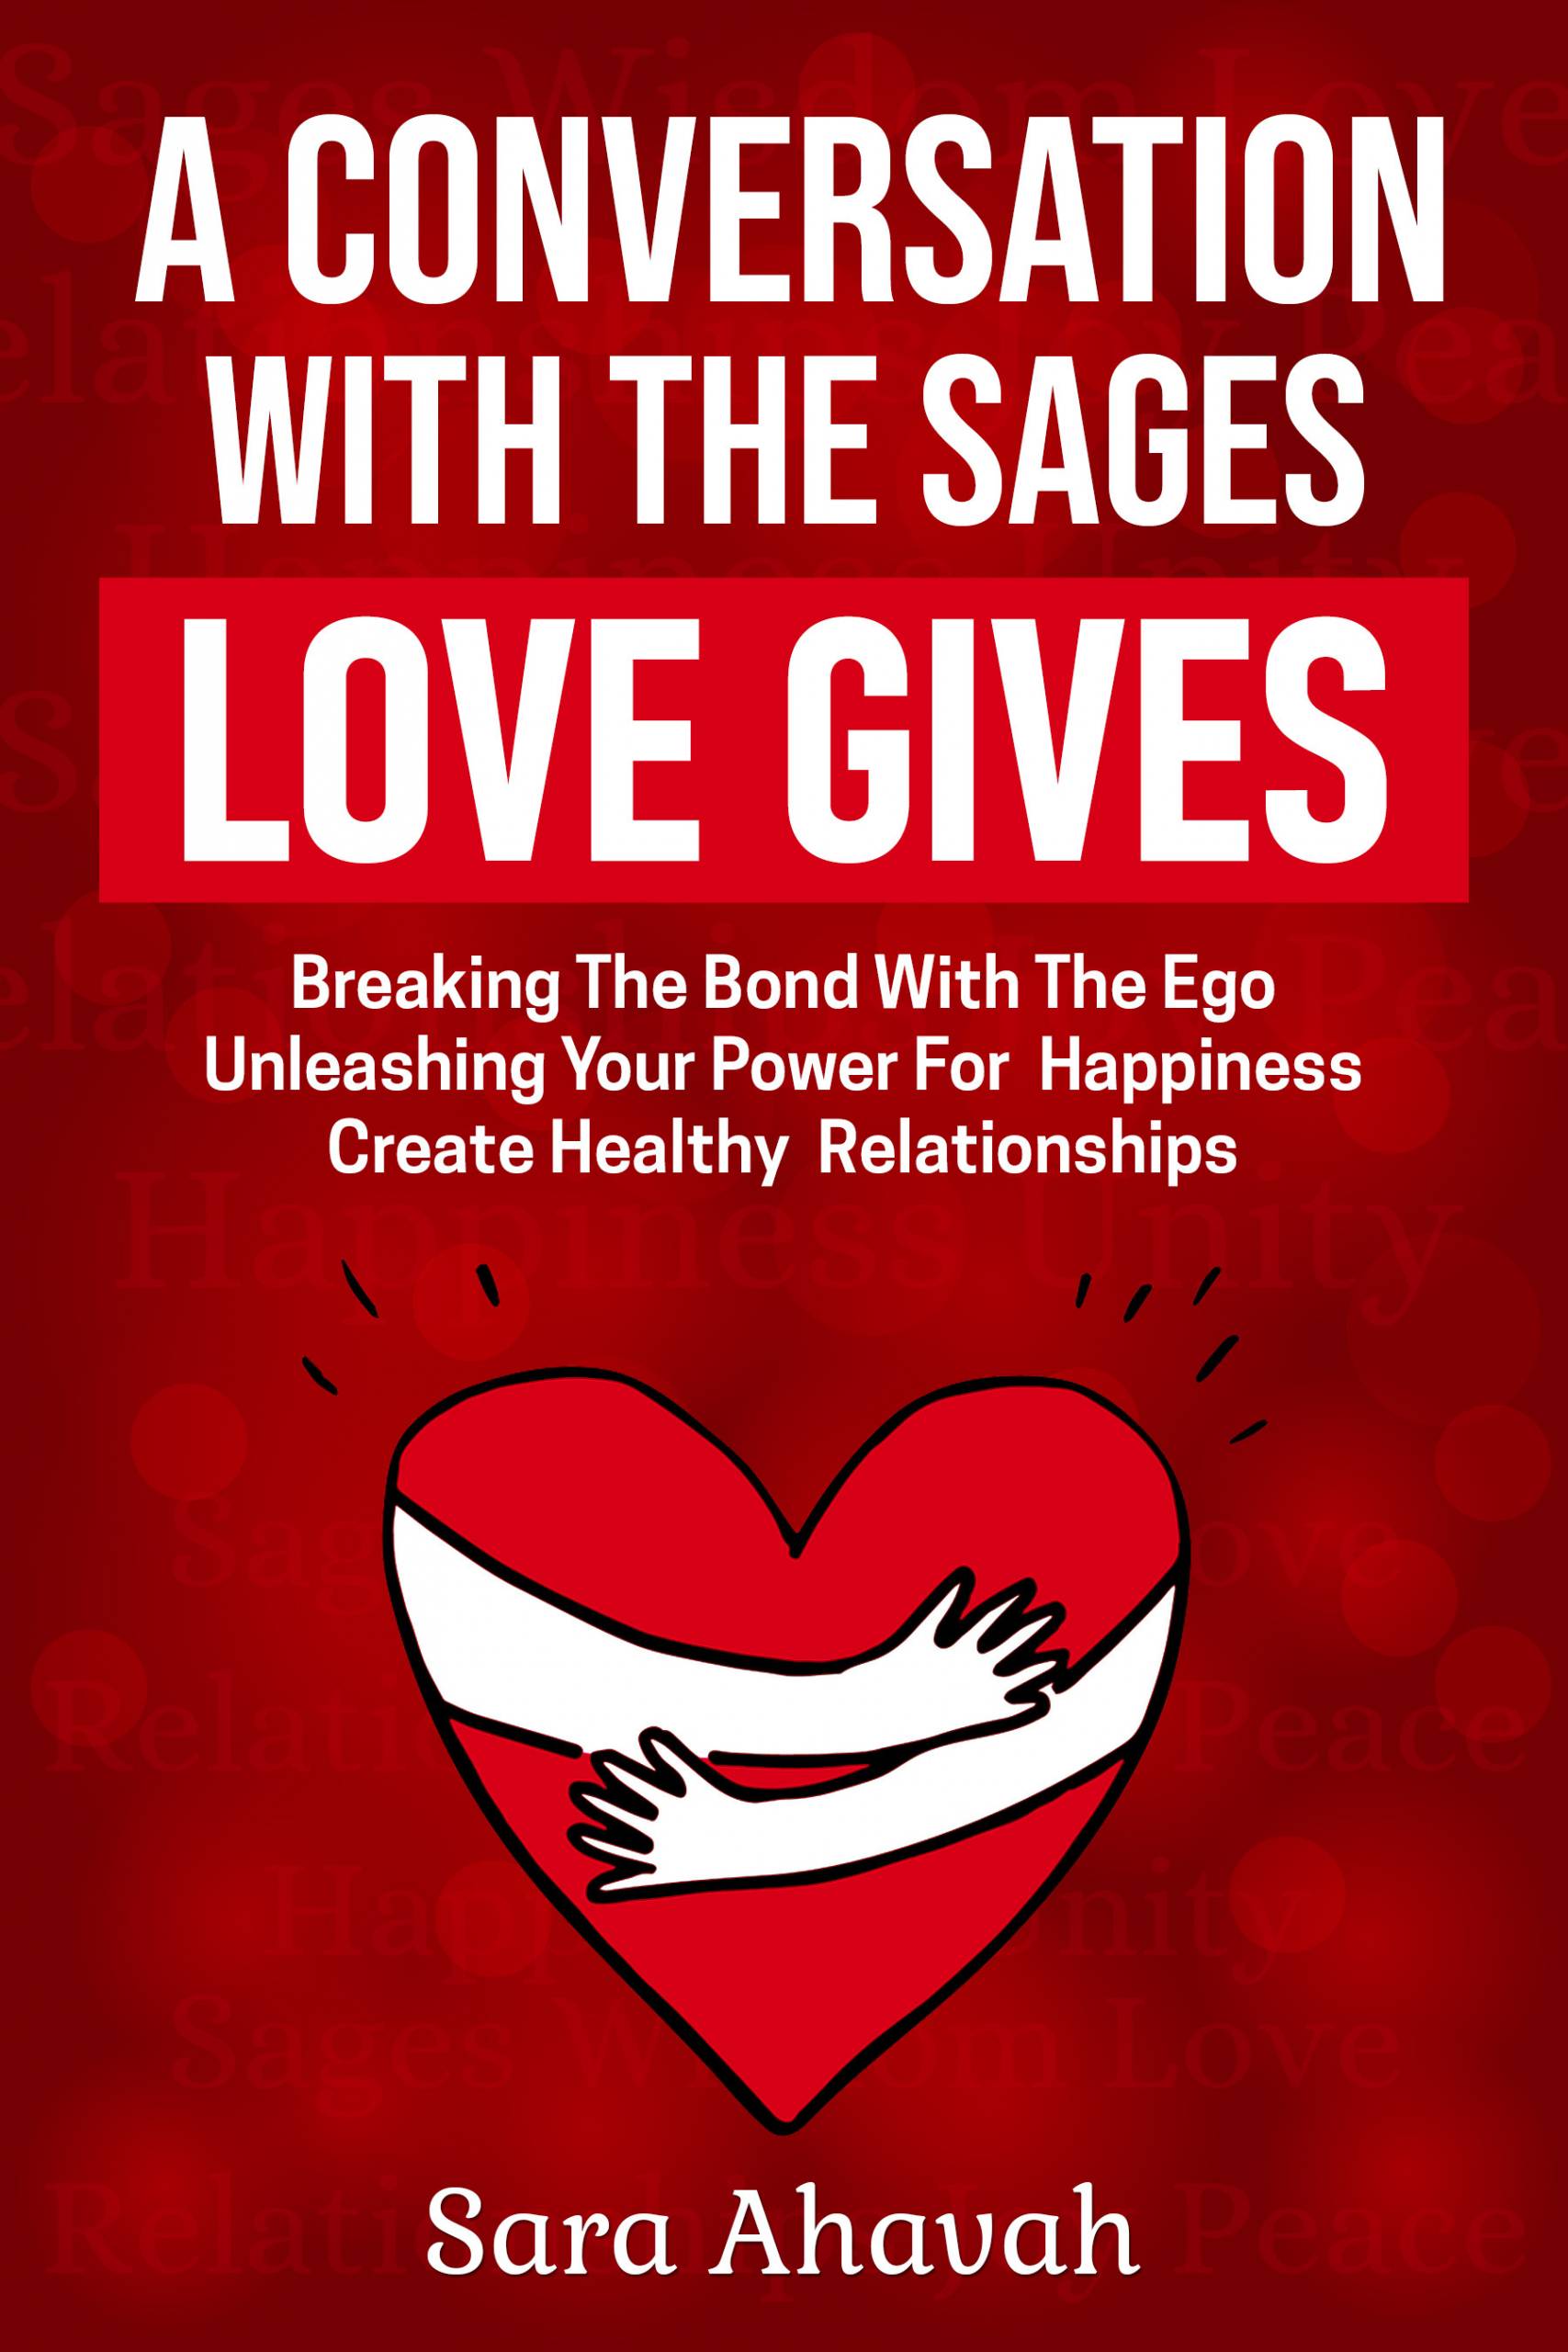 Sarainnerhealing Book-Cover-Design-3-scaled A Conversation With The Sages - LOVE GIVES - Breaking The  Bond With The Ego  